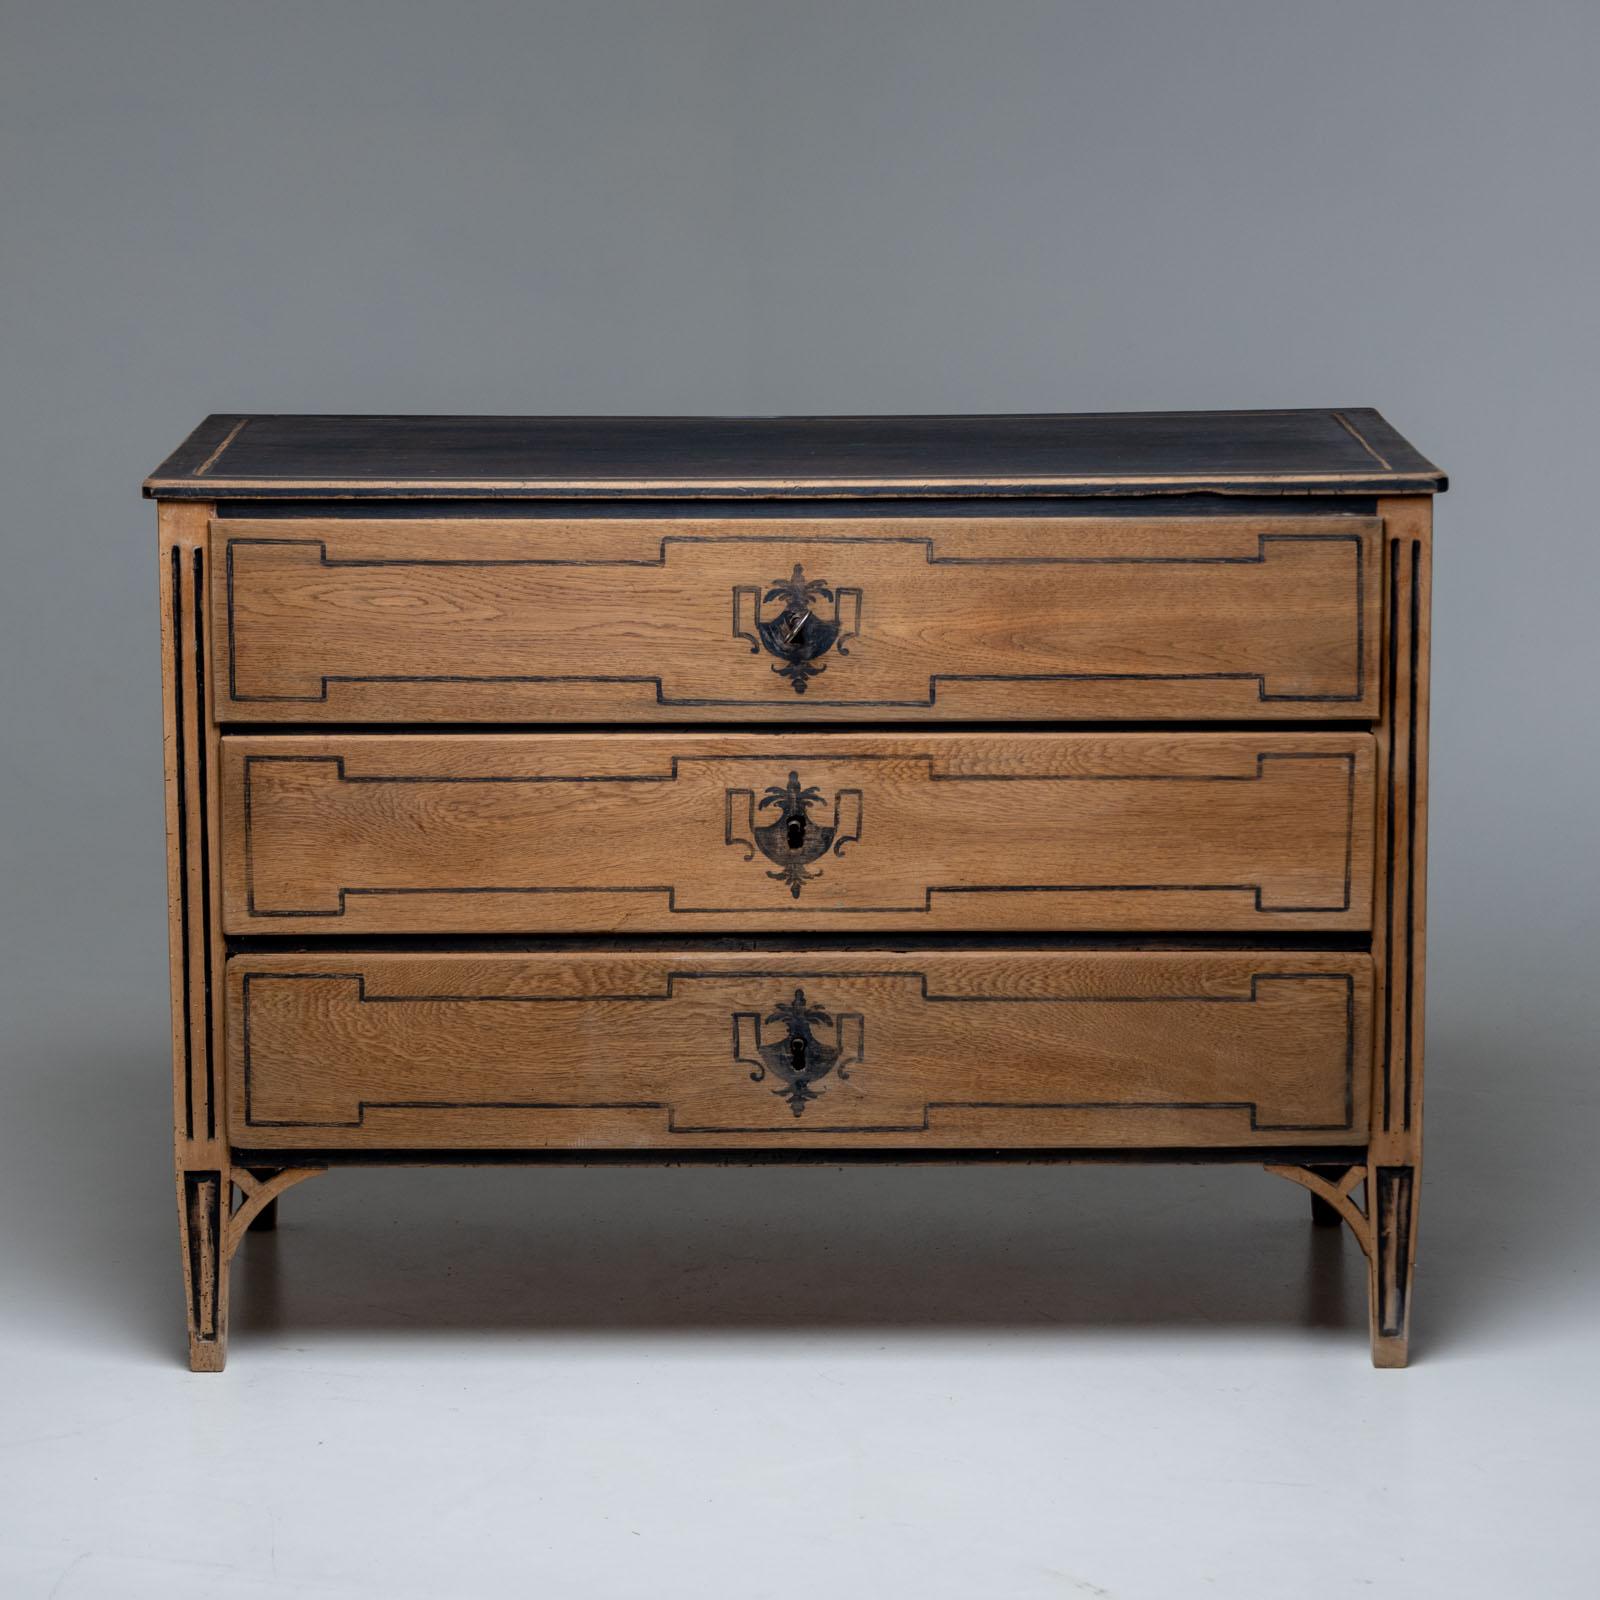 German Painted oak chest of drawers, around 1800